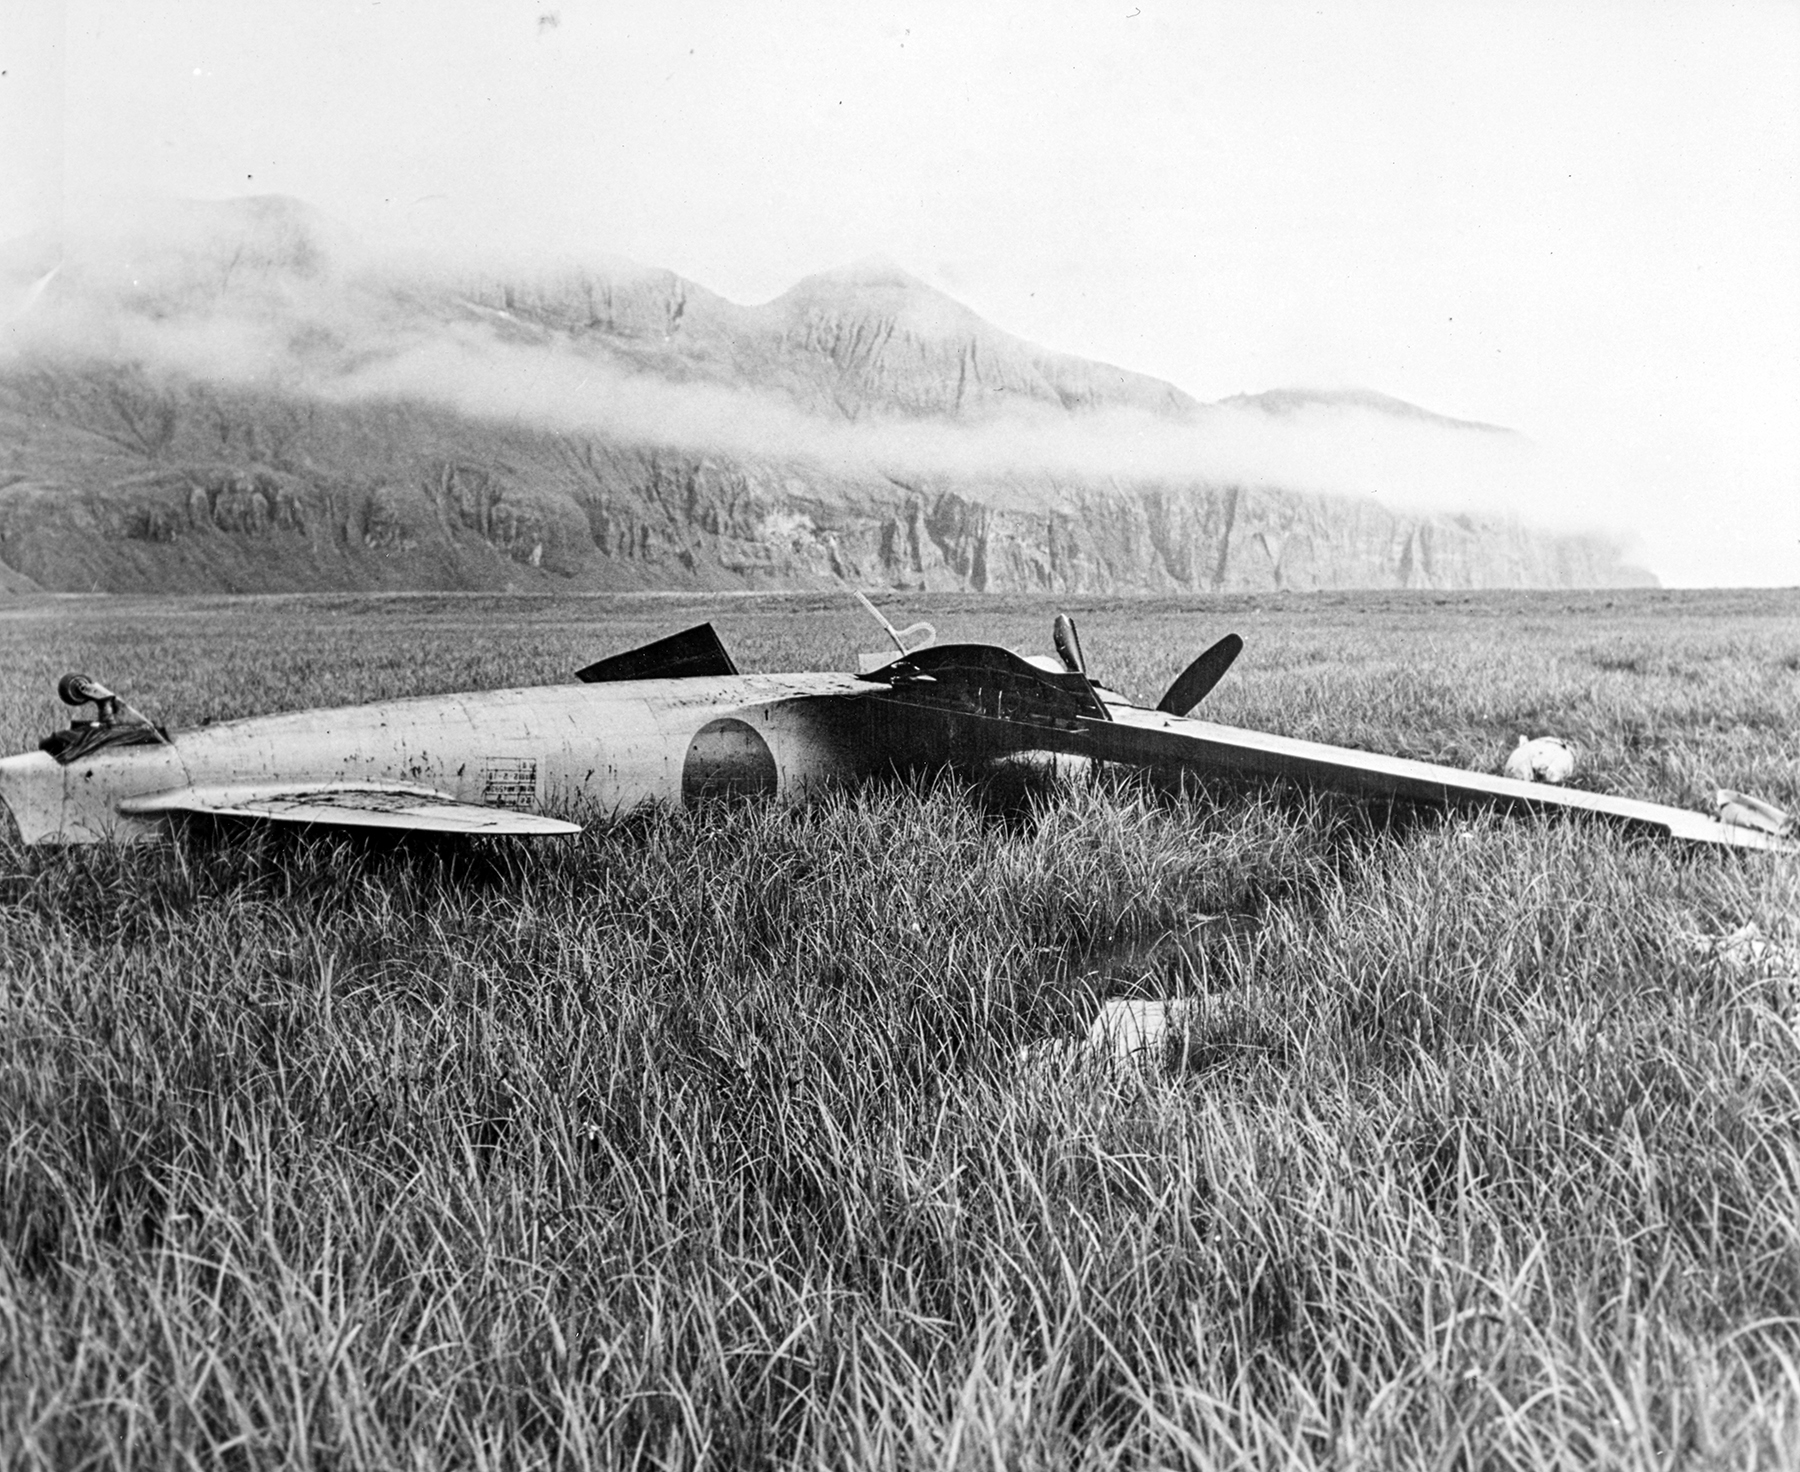 The Akutan Zero, upside-down in the bog as it was found by the salvage party.